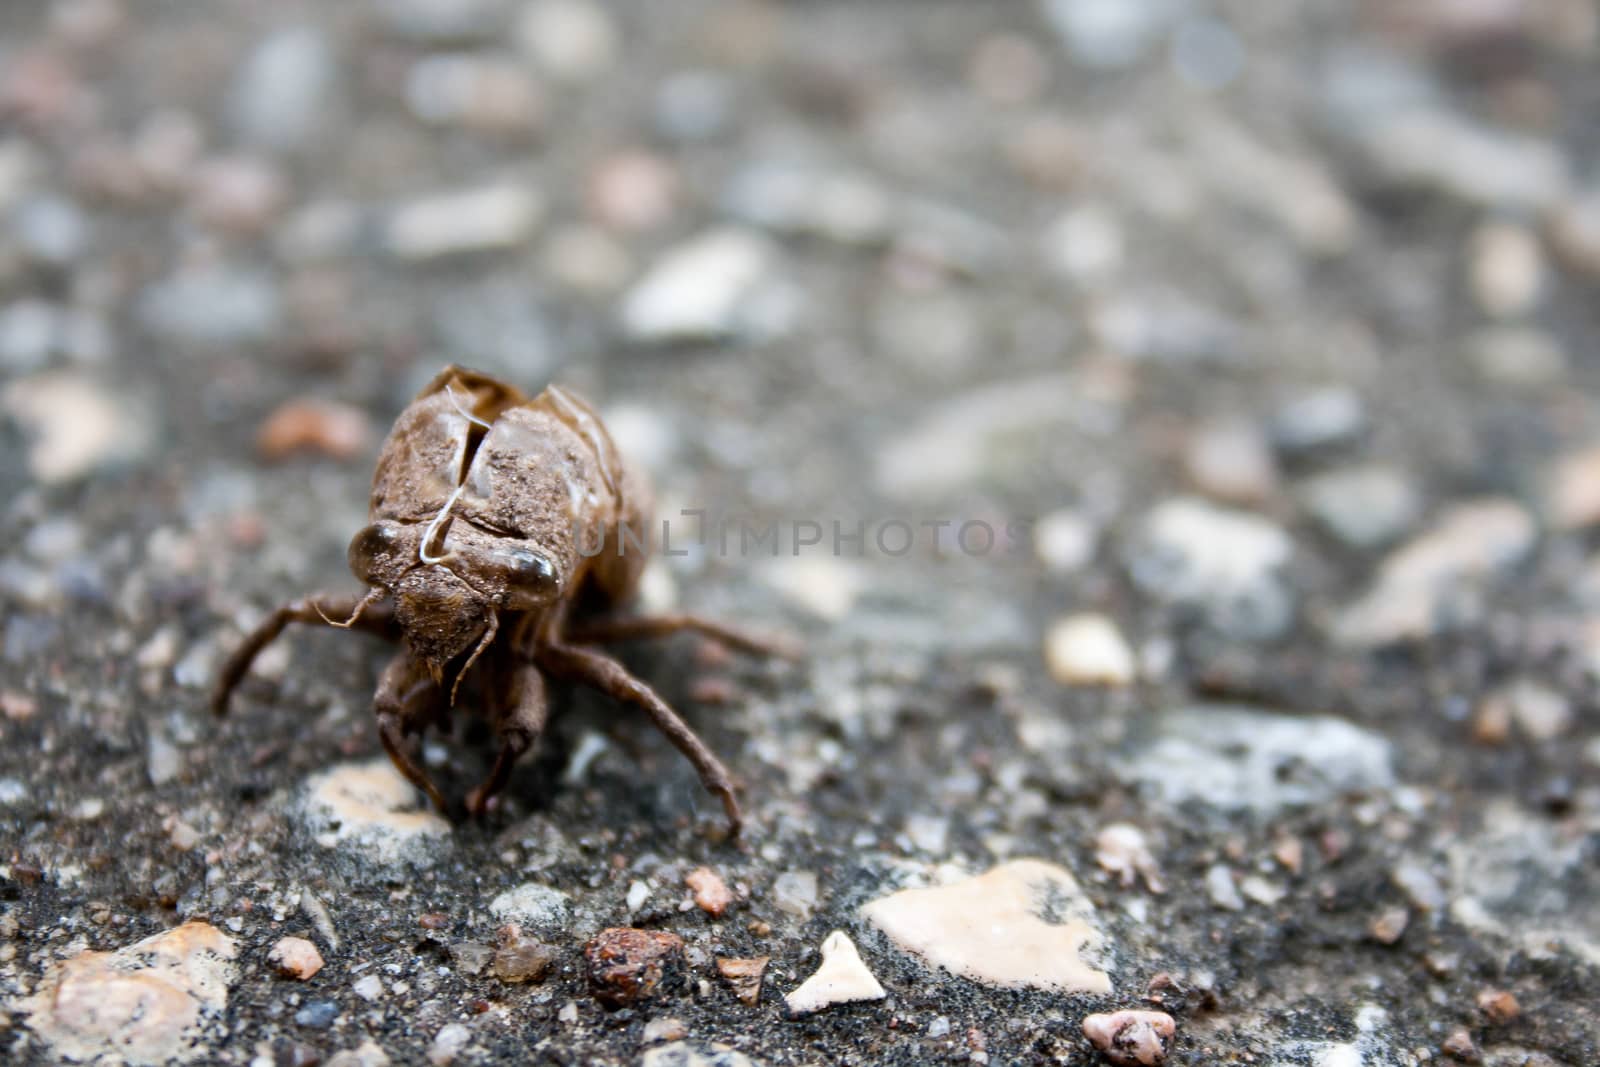 A cicada has molted and left this exoskeleton remaining on the ground. 